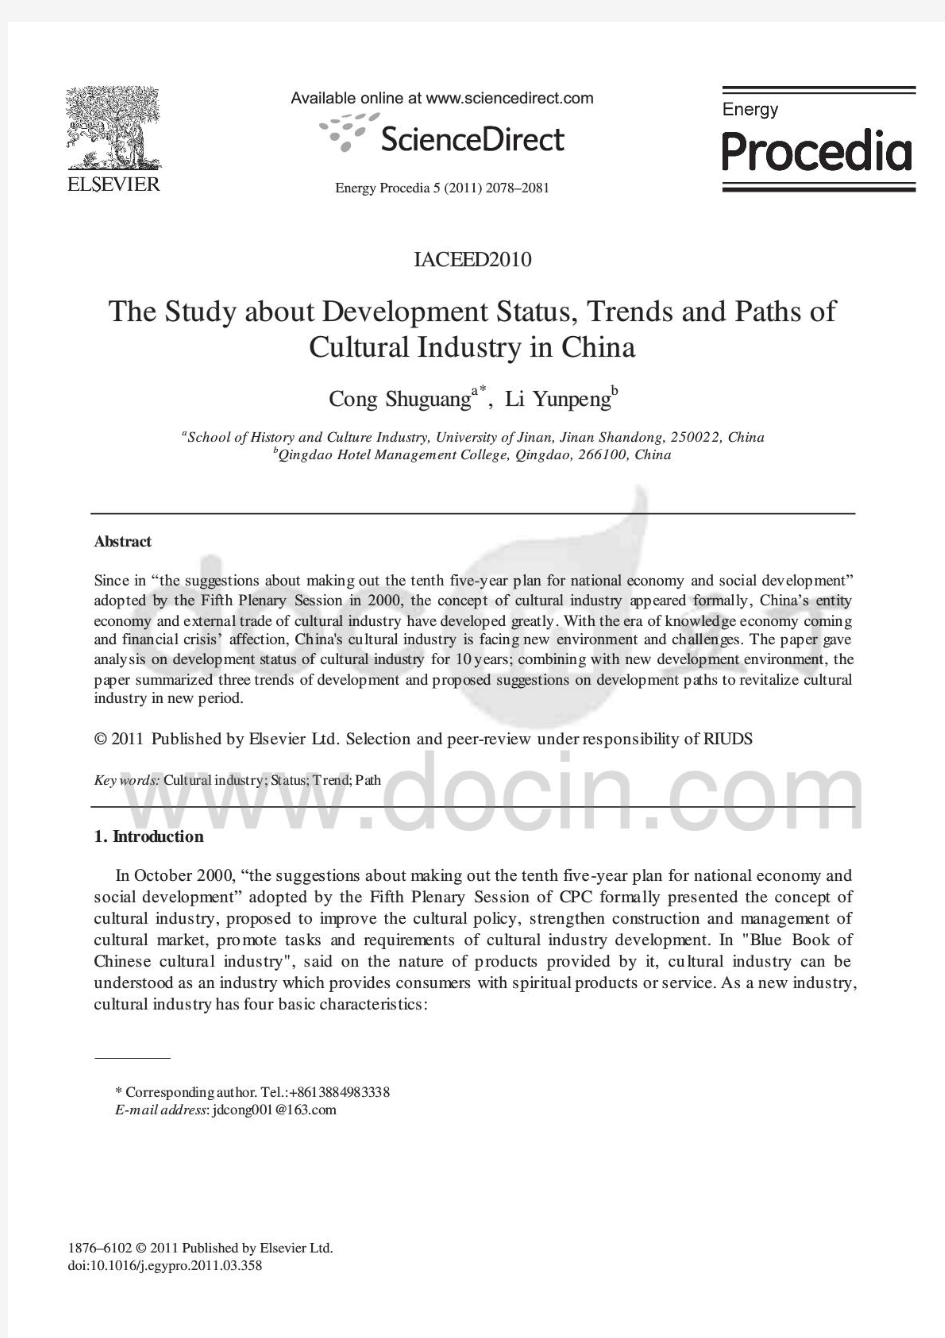 The Study about Development Status,Trends and Paths of Cultural Industry in China Energy Procedia